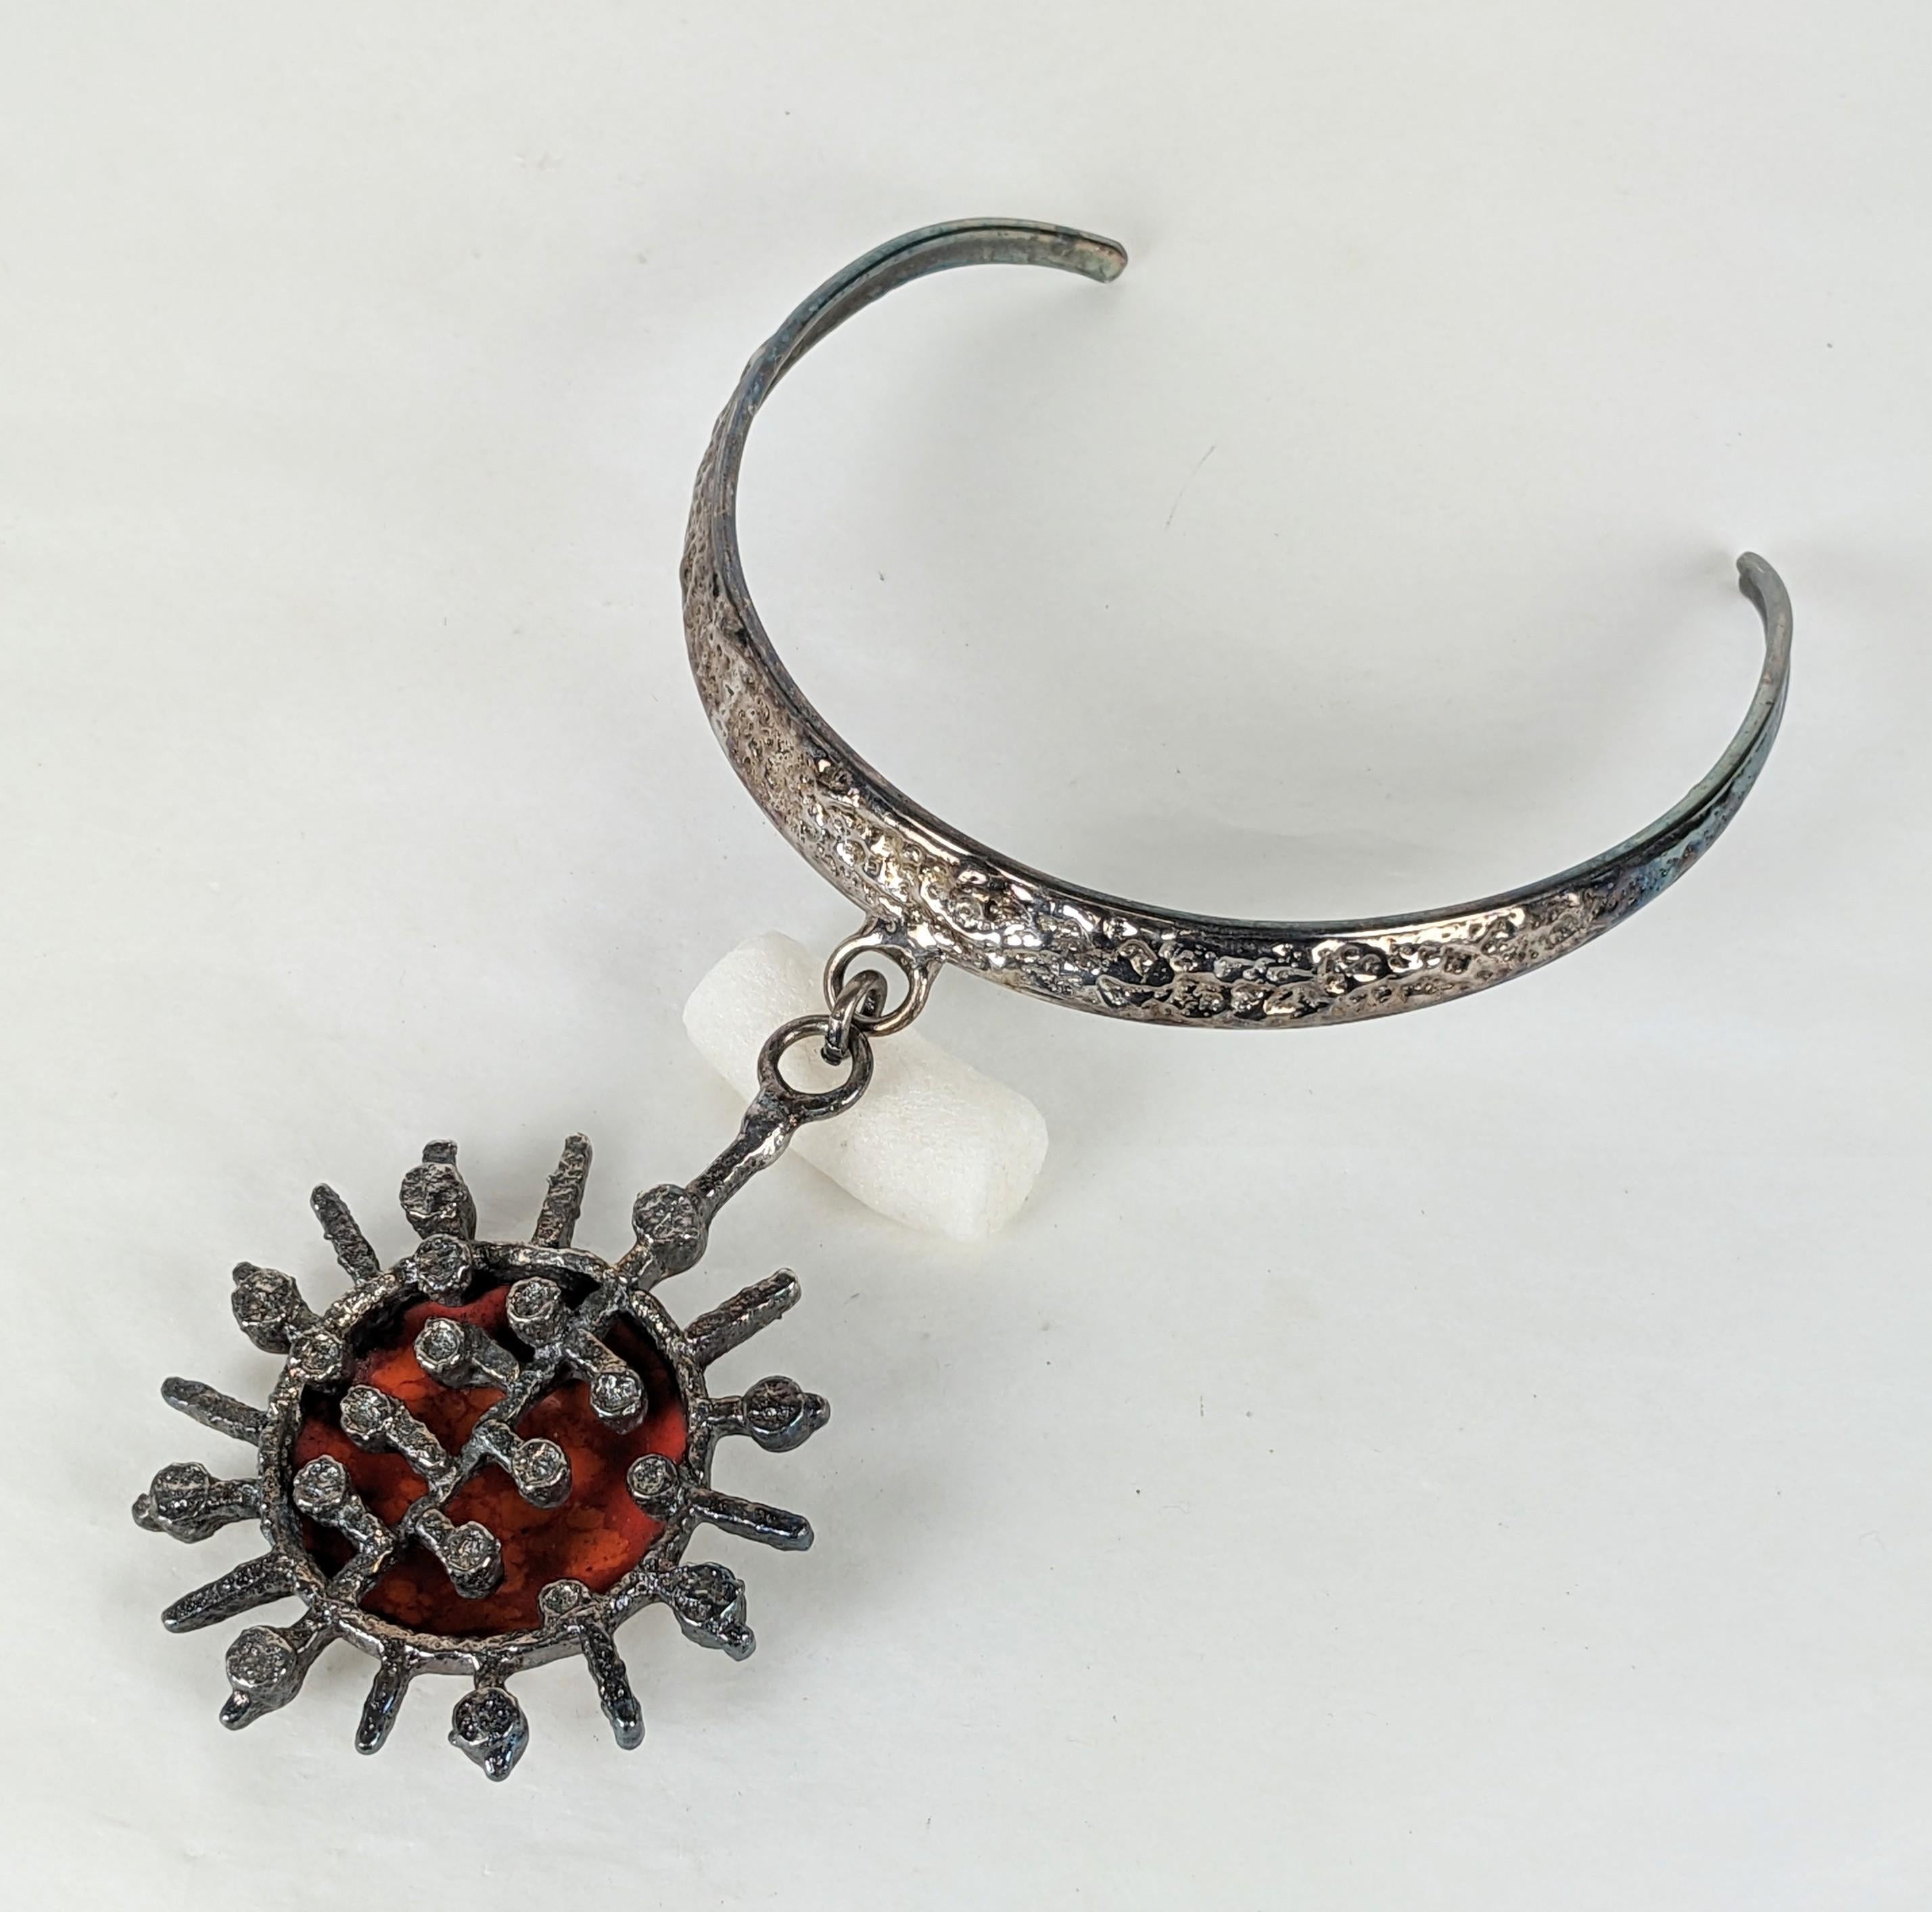 Striking Jacob Hull Enamel Danish Pendant from the 1970's. Textured silverplated bronze collar with a deep Brutalist sunburst pendant with orange and red enamel interior. 
Hard Collar 10.5